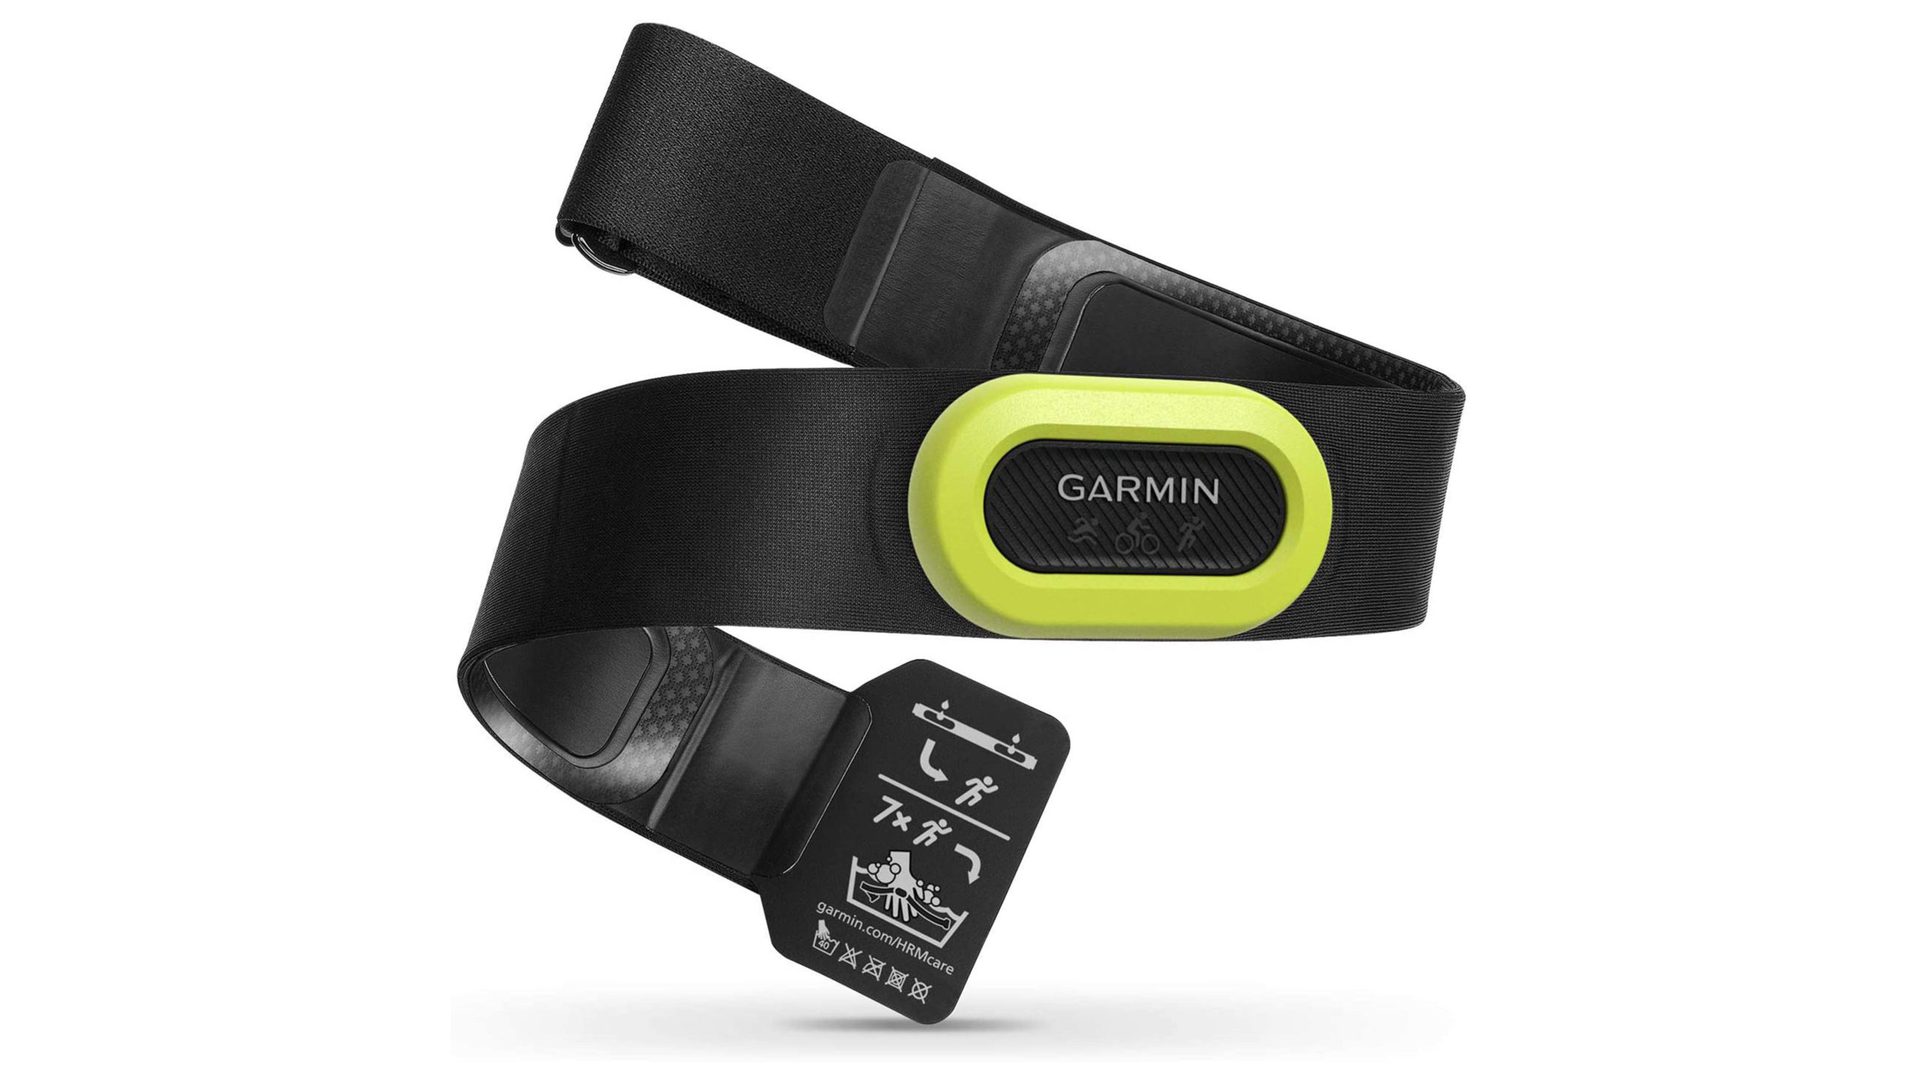 Product shot of a Garmin HRM-Pro heart rate monitor chest strap.